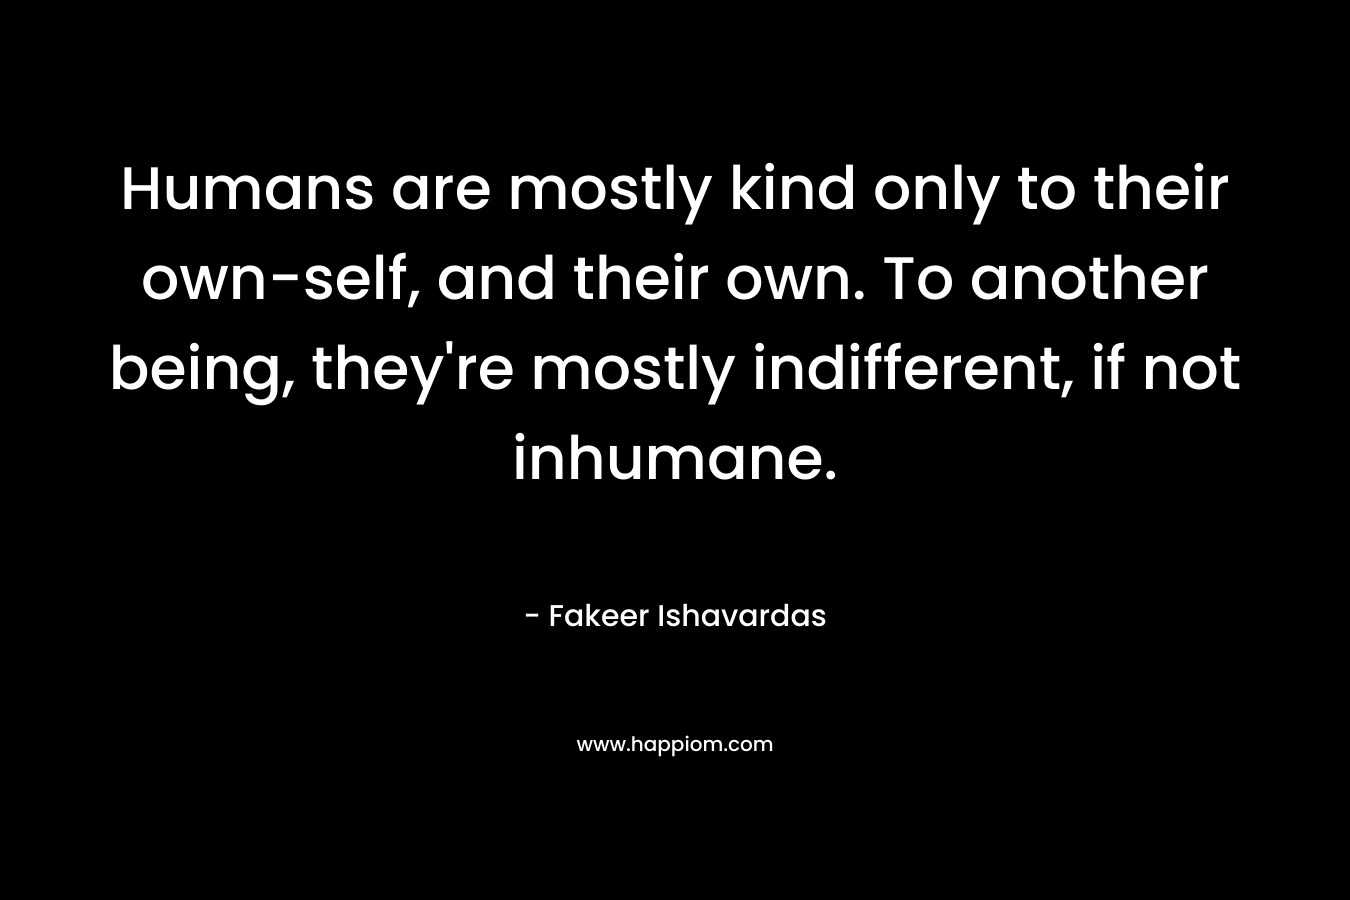 Humans are mostly kind only to their own-self, and their own. To another being, they're mostly indifferent, if not inhumane.